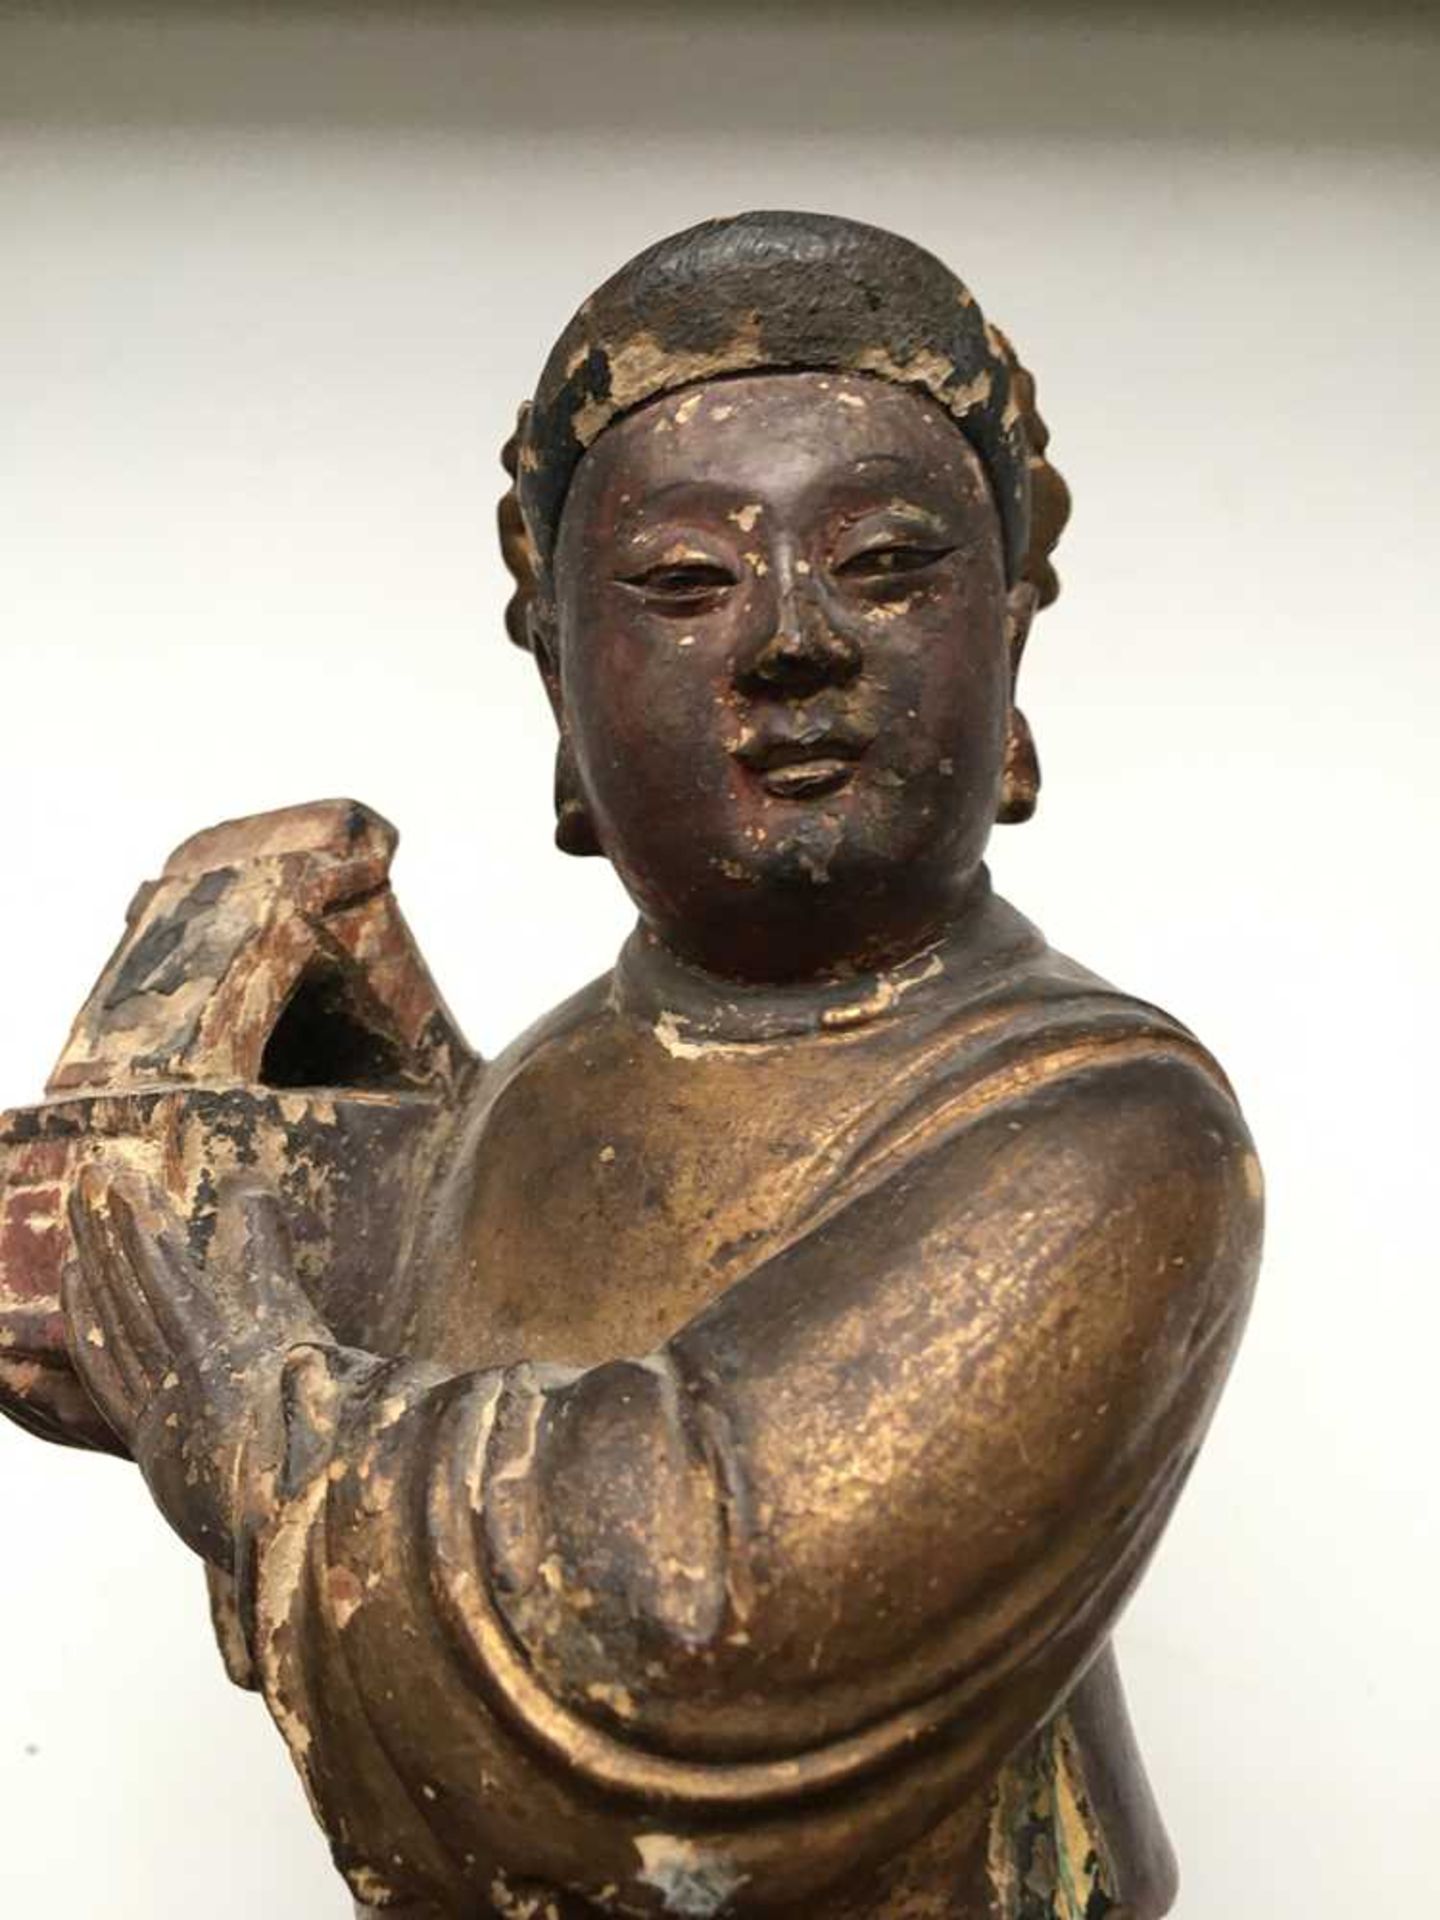 GILT-LACQUERED WOODEN FIGURE OF A DAOIST IMMORTAL QING DYNASTY, 18TH-19TH CENTURY - Image 12 of 20